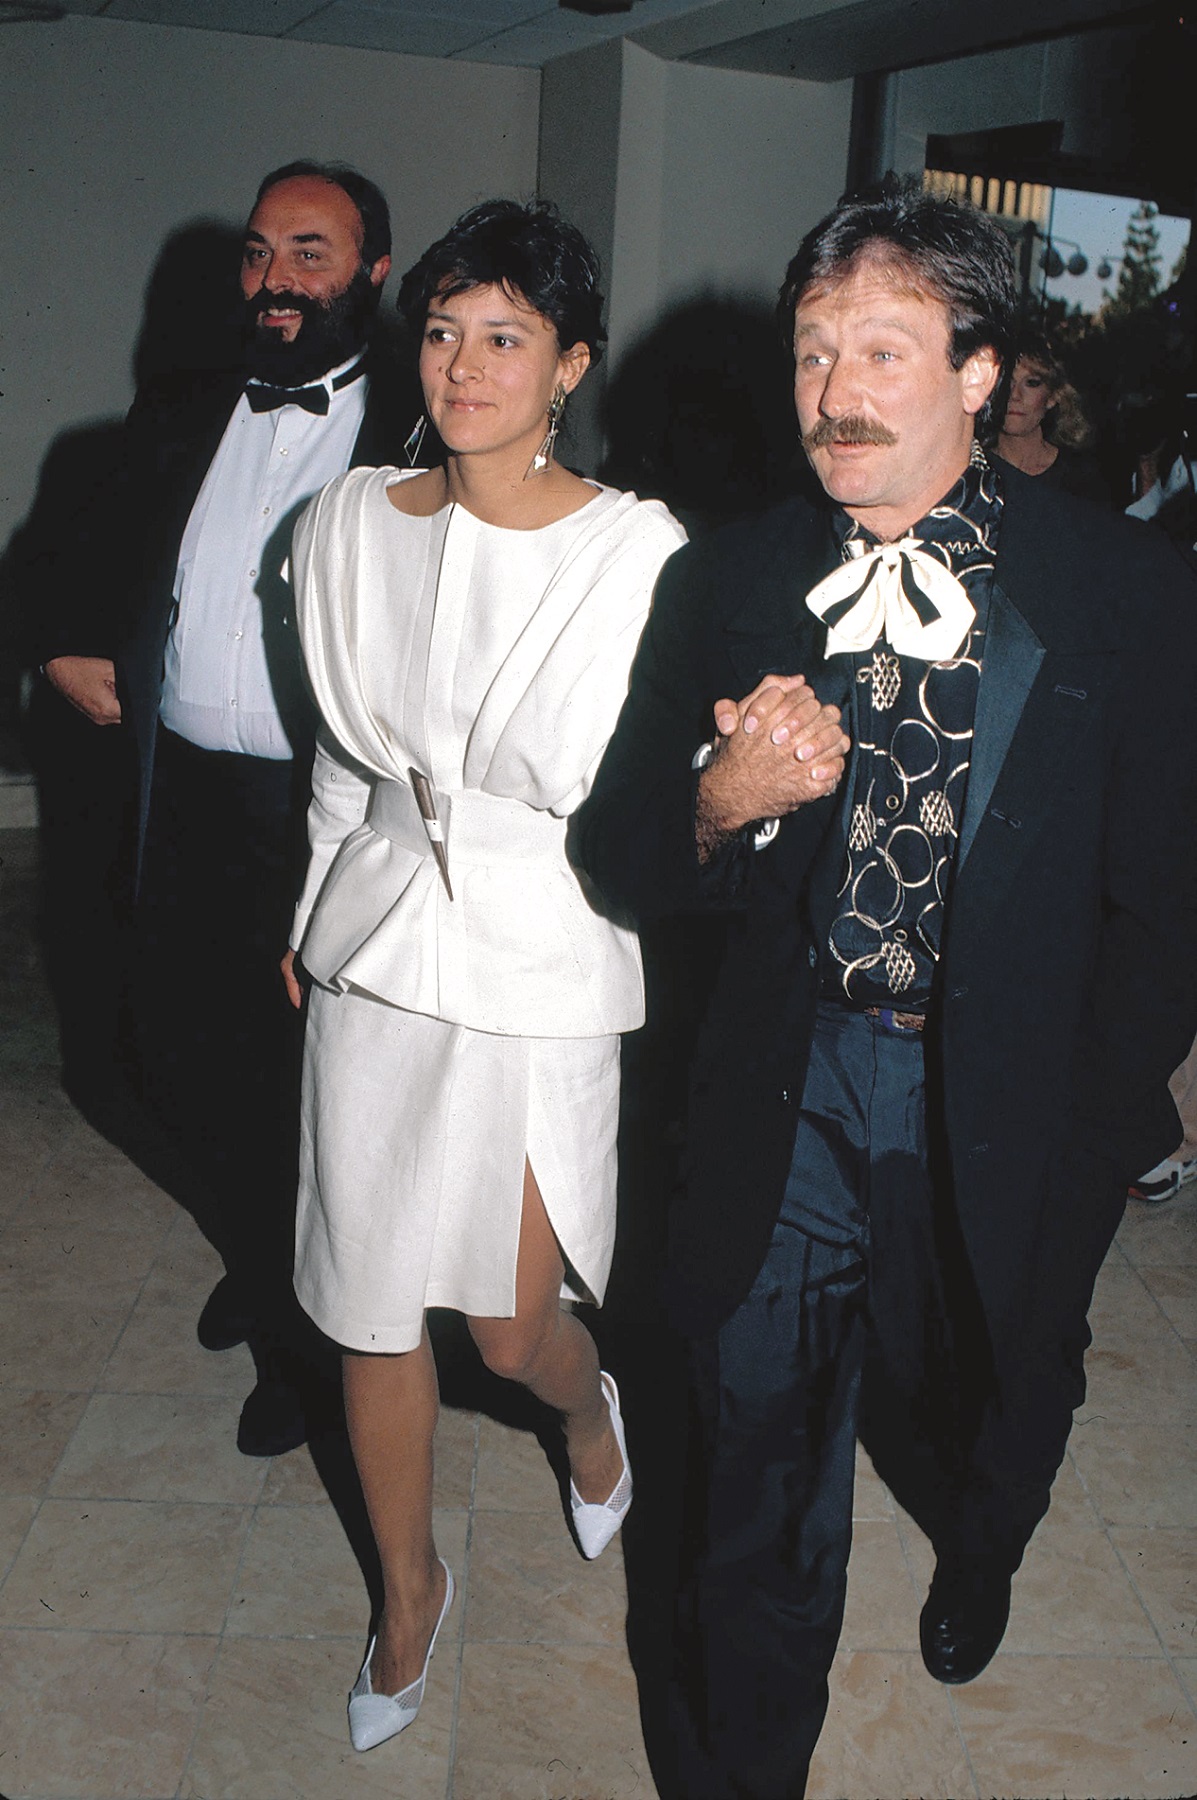 1989, Los Angeles, California, USA: Actor Robin Williams' wife Marsha Garces Williams, files for divorce from the Oscar-winning actor after a 19-year marriage, citing irreconcilable differences. The couple was married in 1989, shortly after the actor's divorce from his previous wife and have two children, an 18-year-old daughter and a 16-year-old son.///Actor Robin Williams (R) with wife Marsha Garces Williams (C) attending the Comedy Awards at the Hyatt Regency Hotel in Century City.,Image: 24795090, License: Rights-managed, Restrictions: , Model Release: no, Credit line: Gary Lewis / Polaris / Profimedia